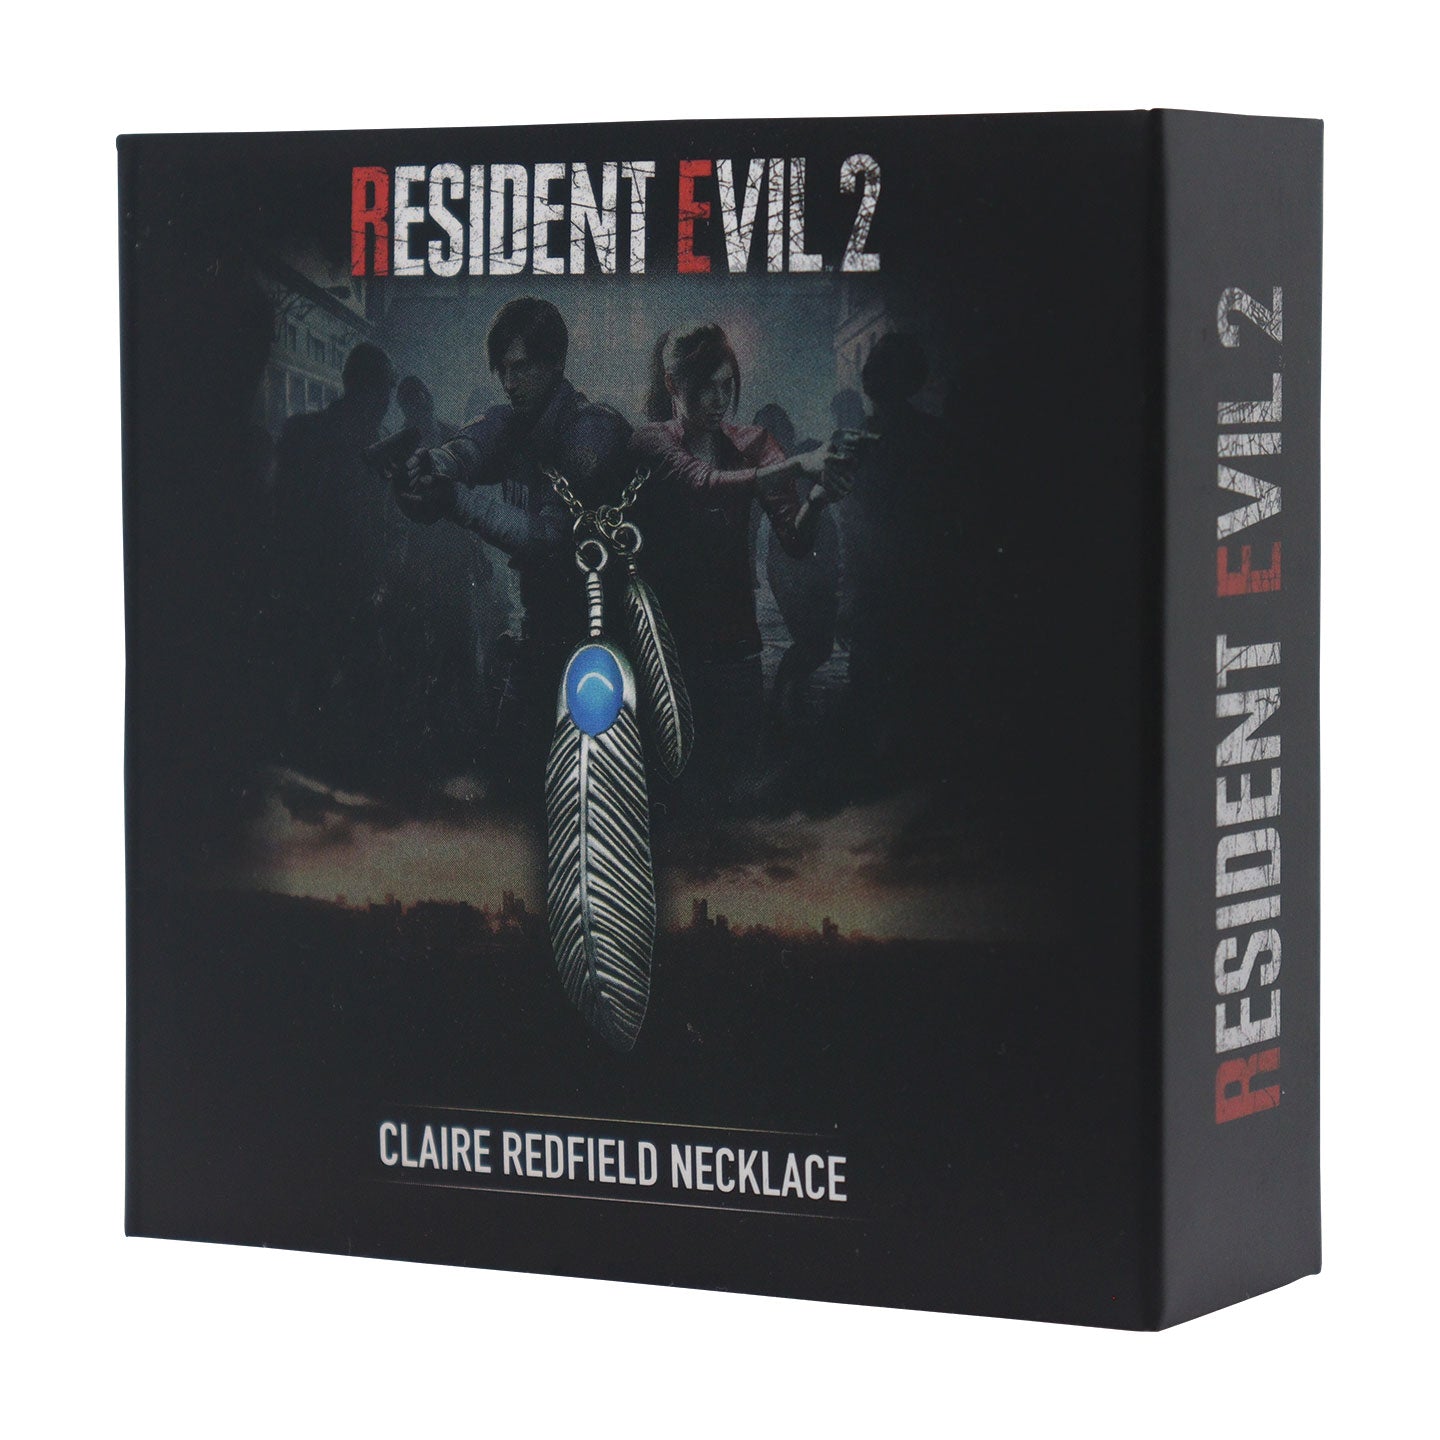 Resident Evil 2 Limited Edition Replica Claire Redfield's Unisex Necklace